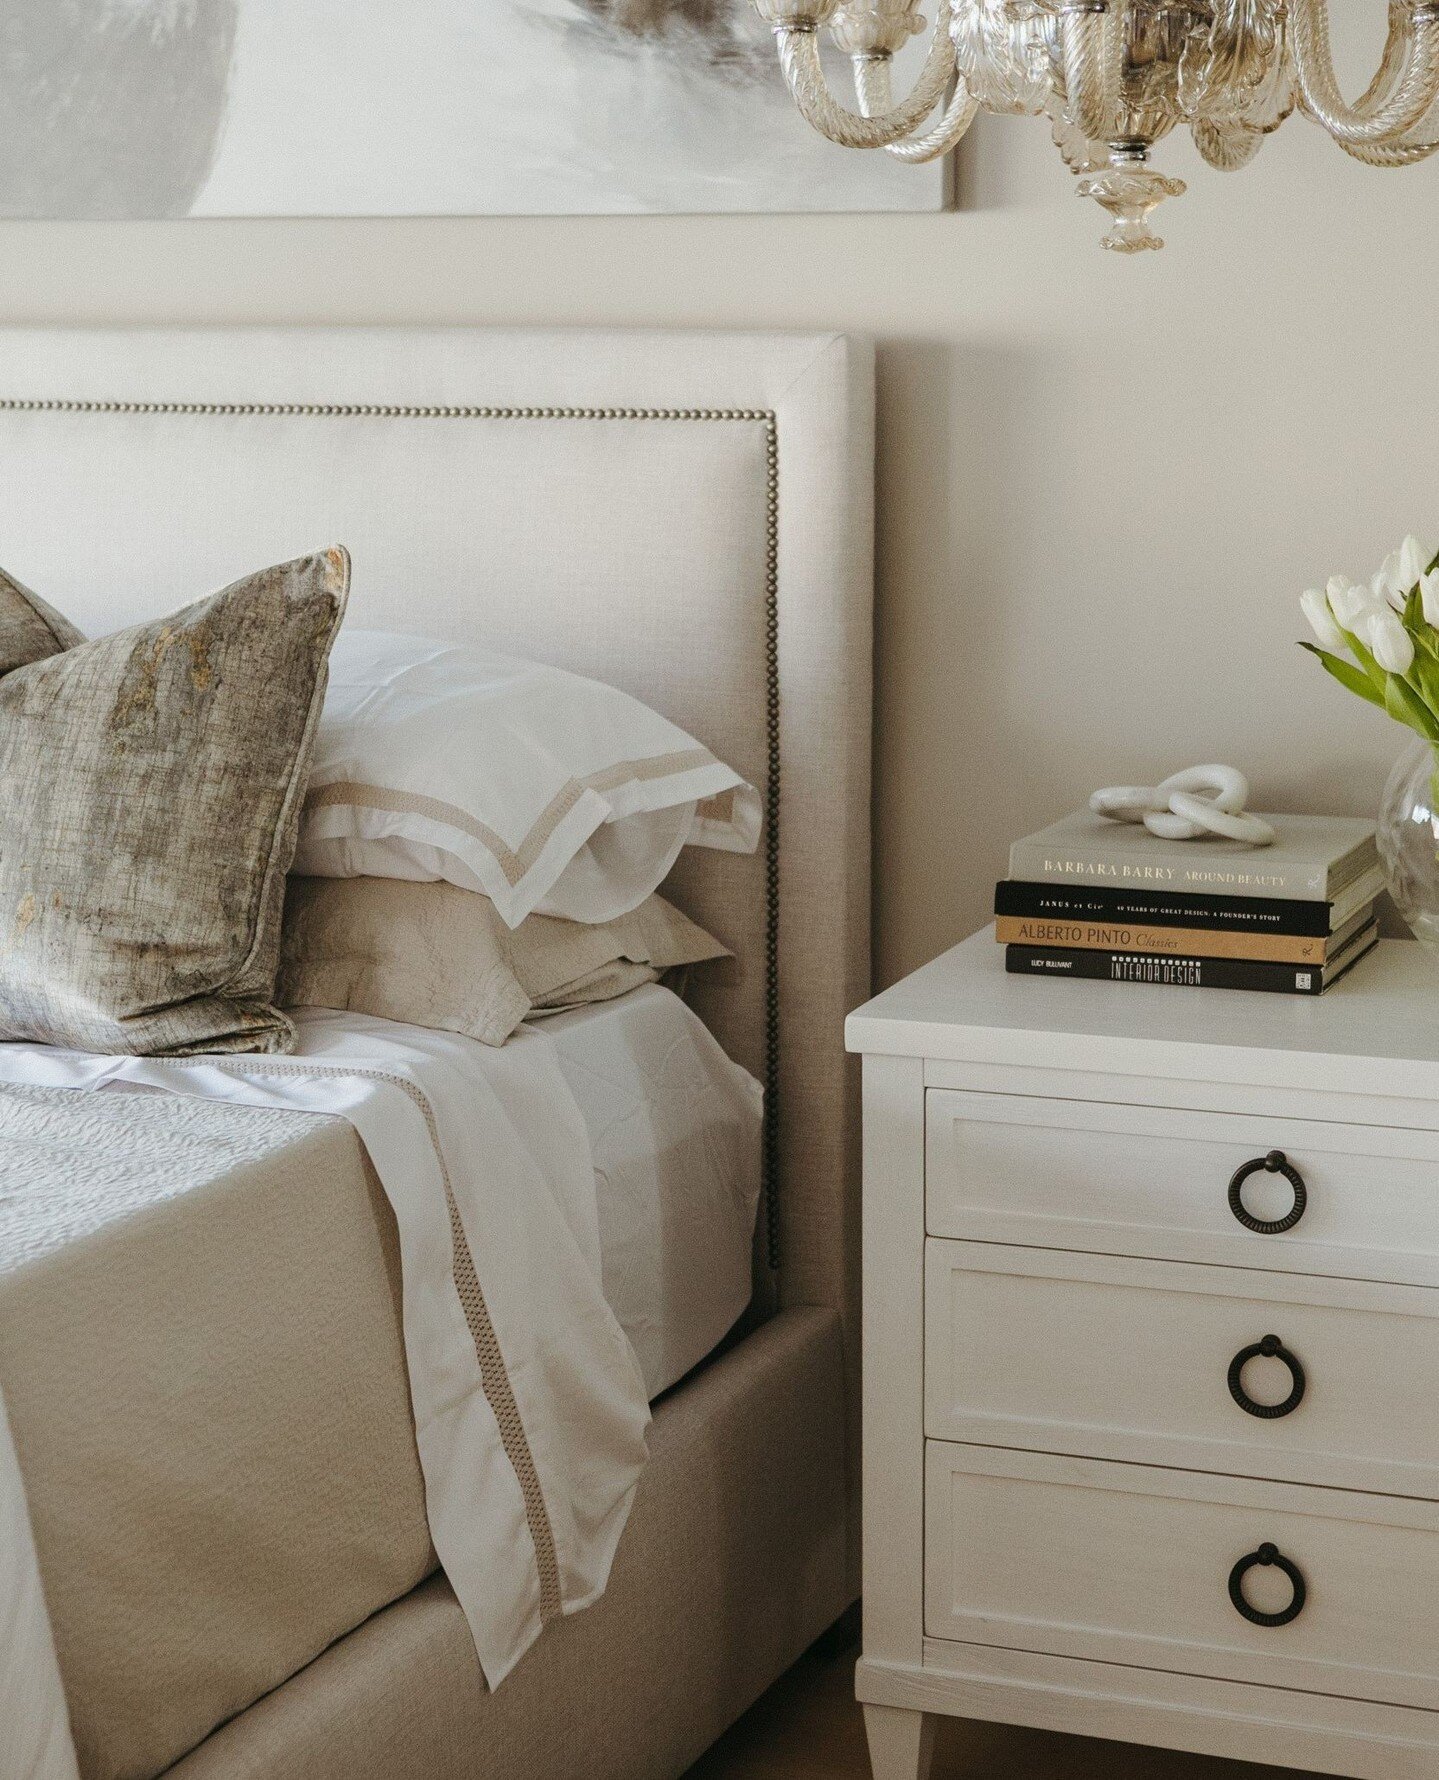 bldc is now exclusively carrying two designer bedding lines, with samples in-studio.⁠
⁠
Amalia Home @amaliahomecollection is elegant, luxurious bedding from Portugal with custom options. High thread count designer linens include sheeting, matelass&ea